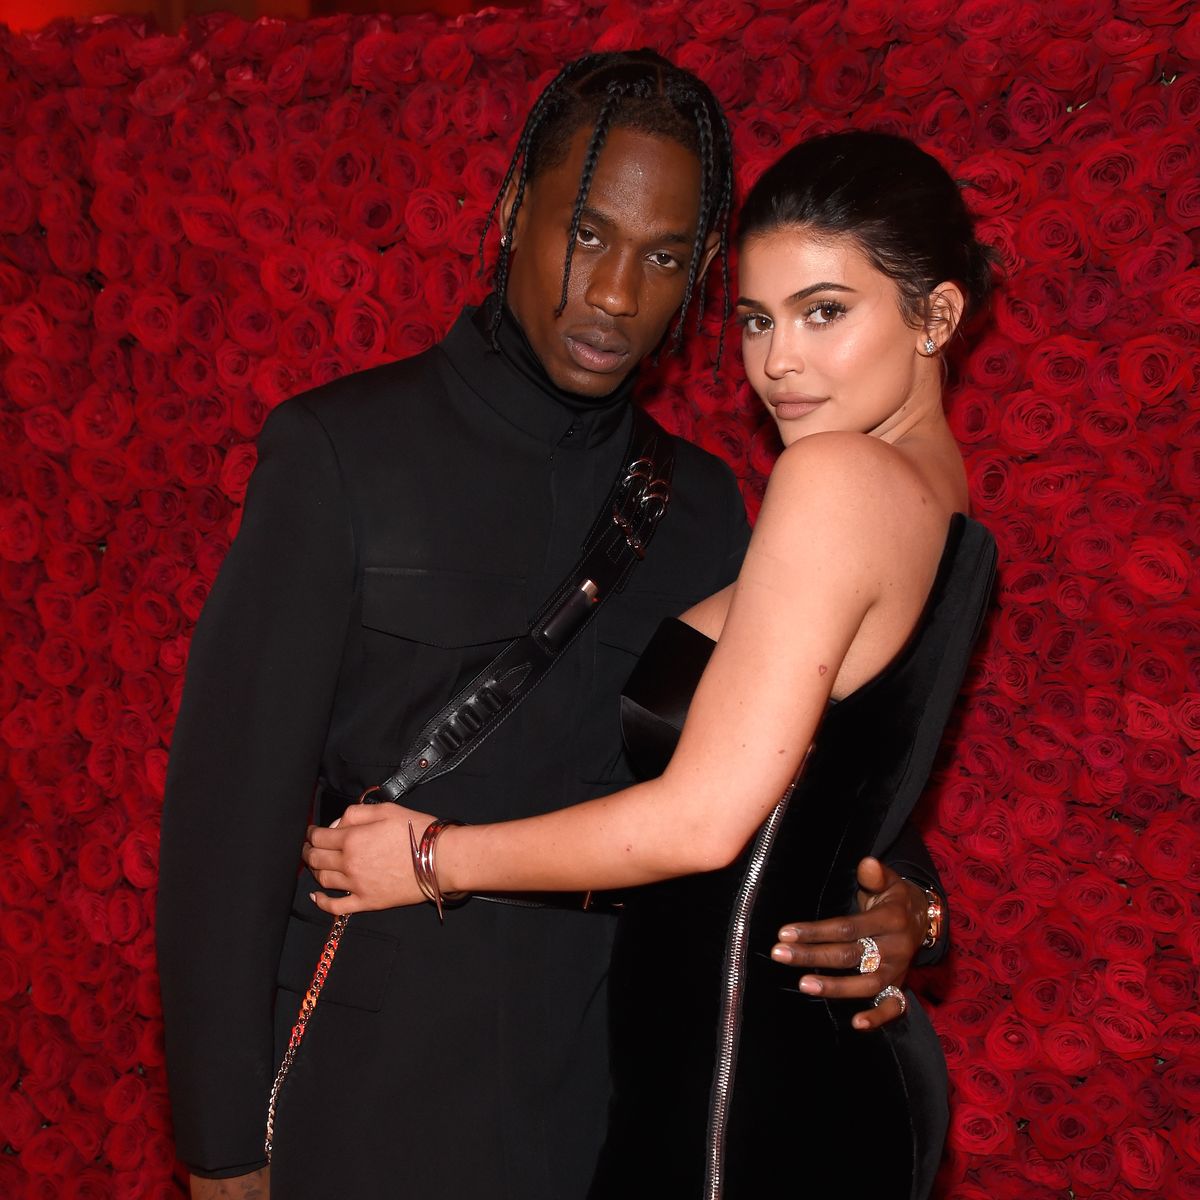 new york, ny   may 07  travis scott l and kylie jenner attend the heavenly bodies fashion  the catholic imagination costume institute gala at the metropolitan museum of art on may 7, 2018 in new york city  photo by kevin mazurmg18getty images for the met museumvogue